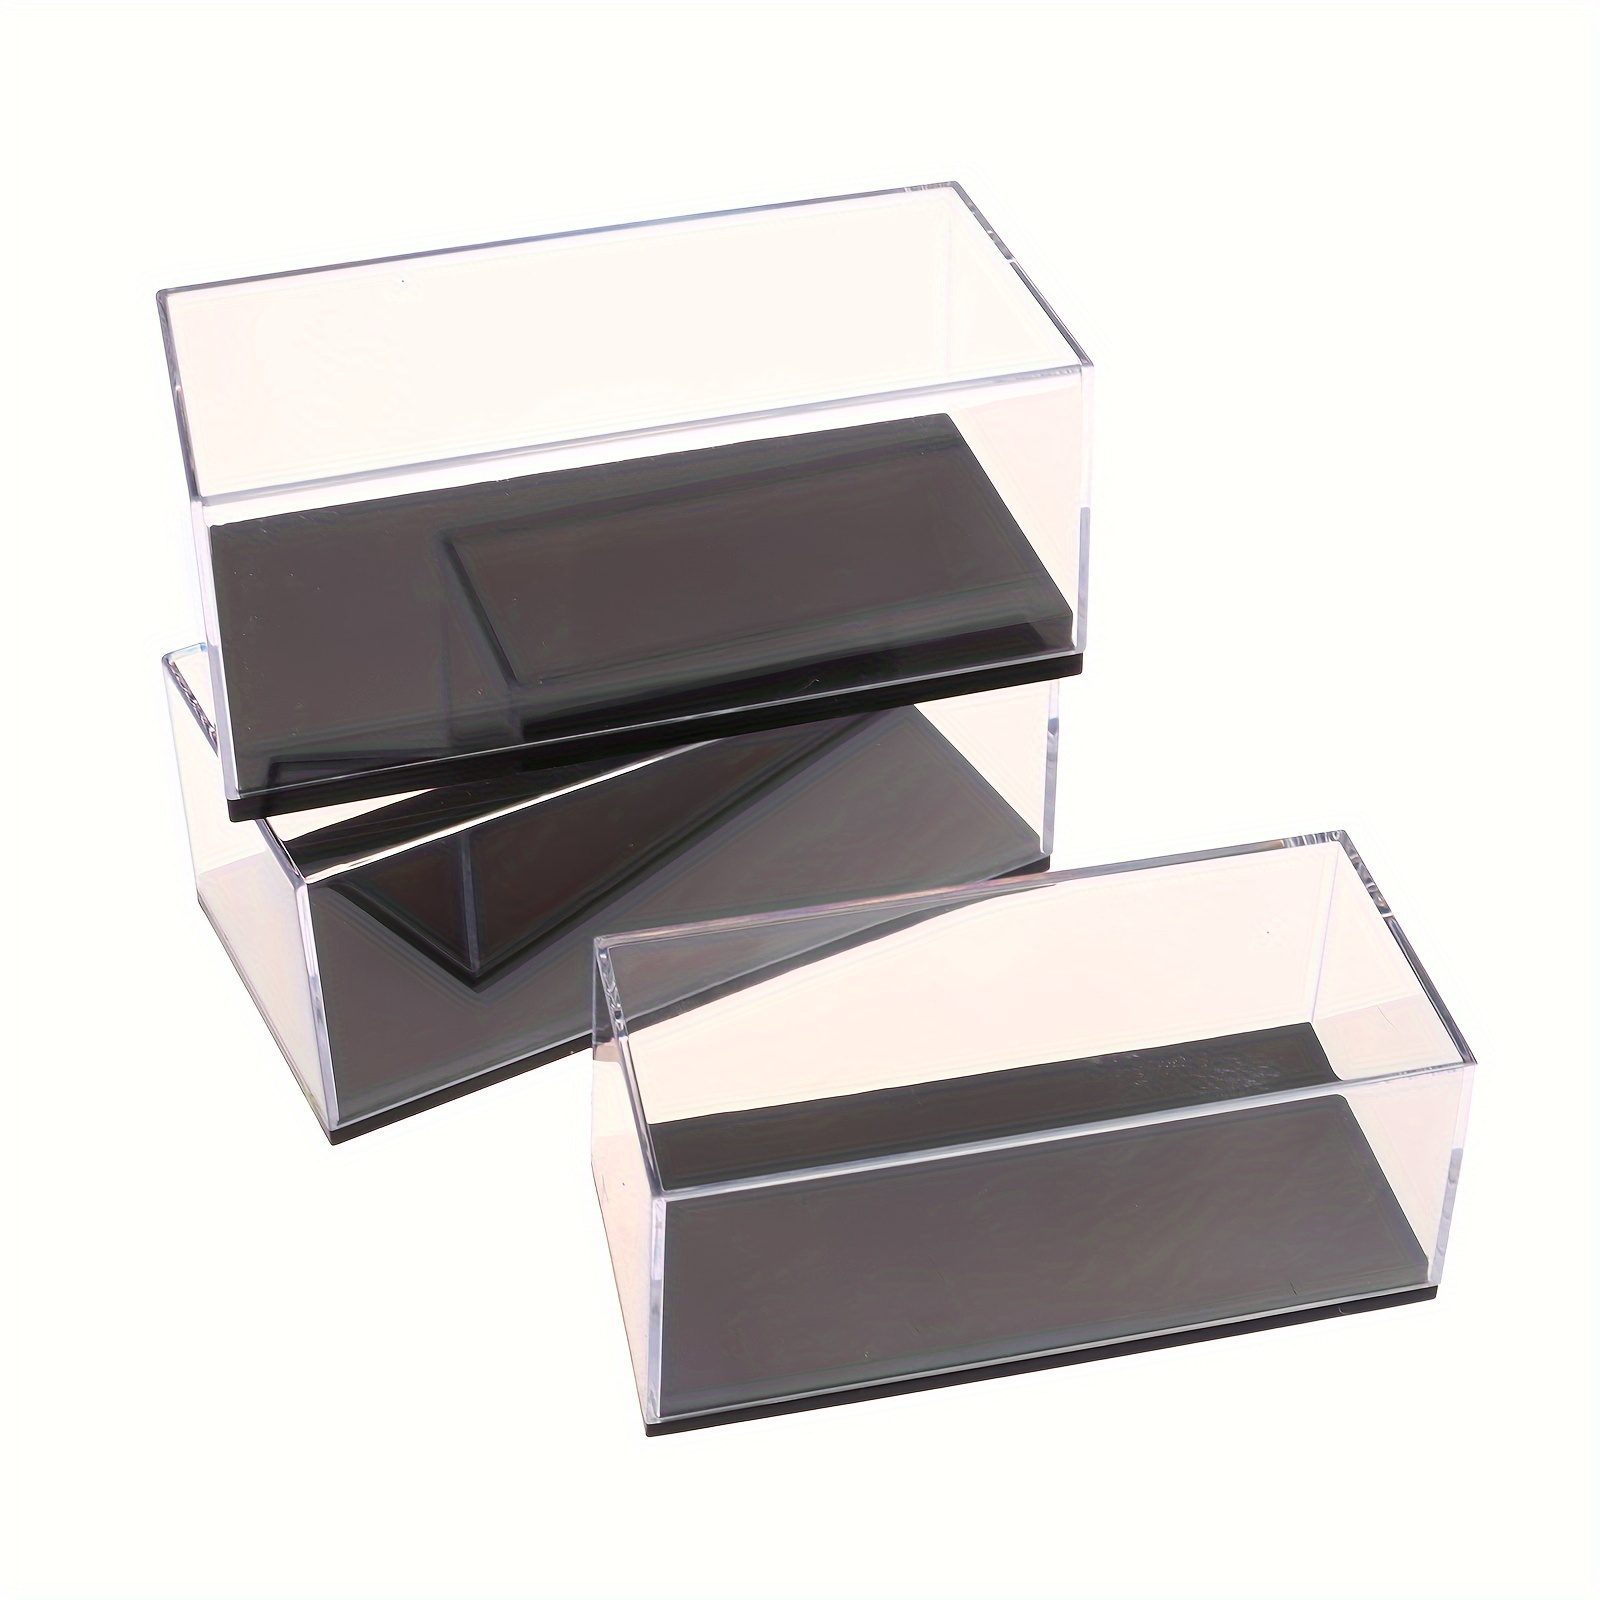 

Premium Acrylic Car Model Display Case - Transparent, Dustproof Protective Box For Scale Models - Available In 3 Sizes